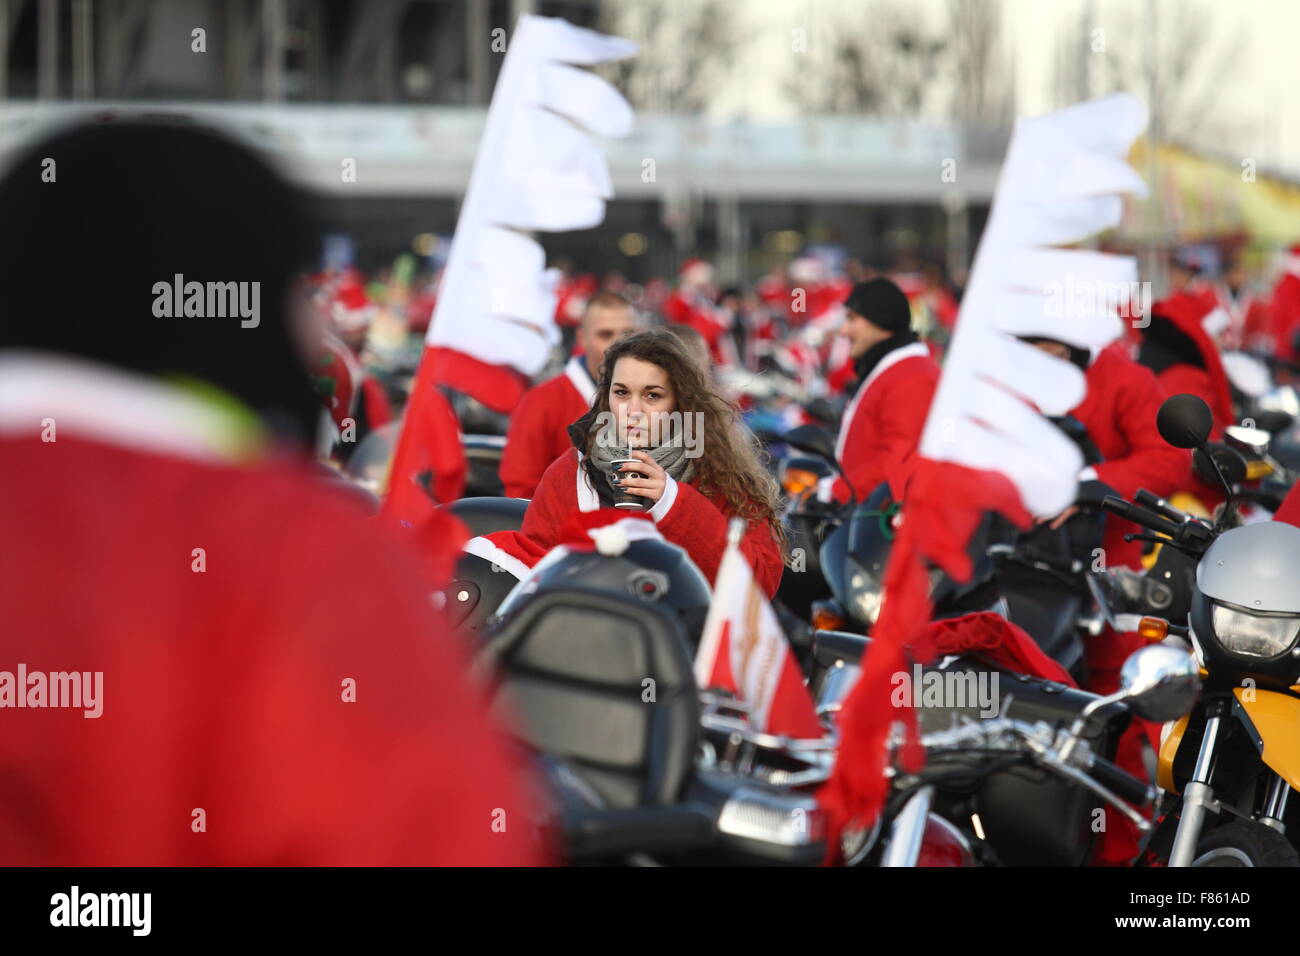 Gdansk, Poland 6th, Dec. 2015 Few thousands Santa Clauses on motorbikes participate in the charity parade on ThreeCity streets. Motorbikers passed from Energa Arena stadium in Gdansk to the Kosciuszko Square in Gdynia to collect money for needy children. Credit:  Michal Fludra/Alamy Live News Stock Photo